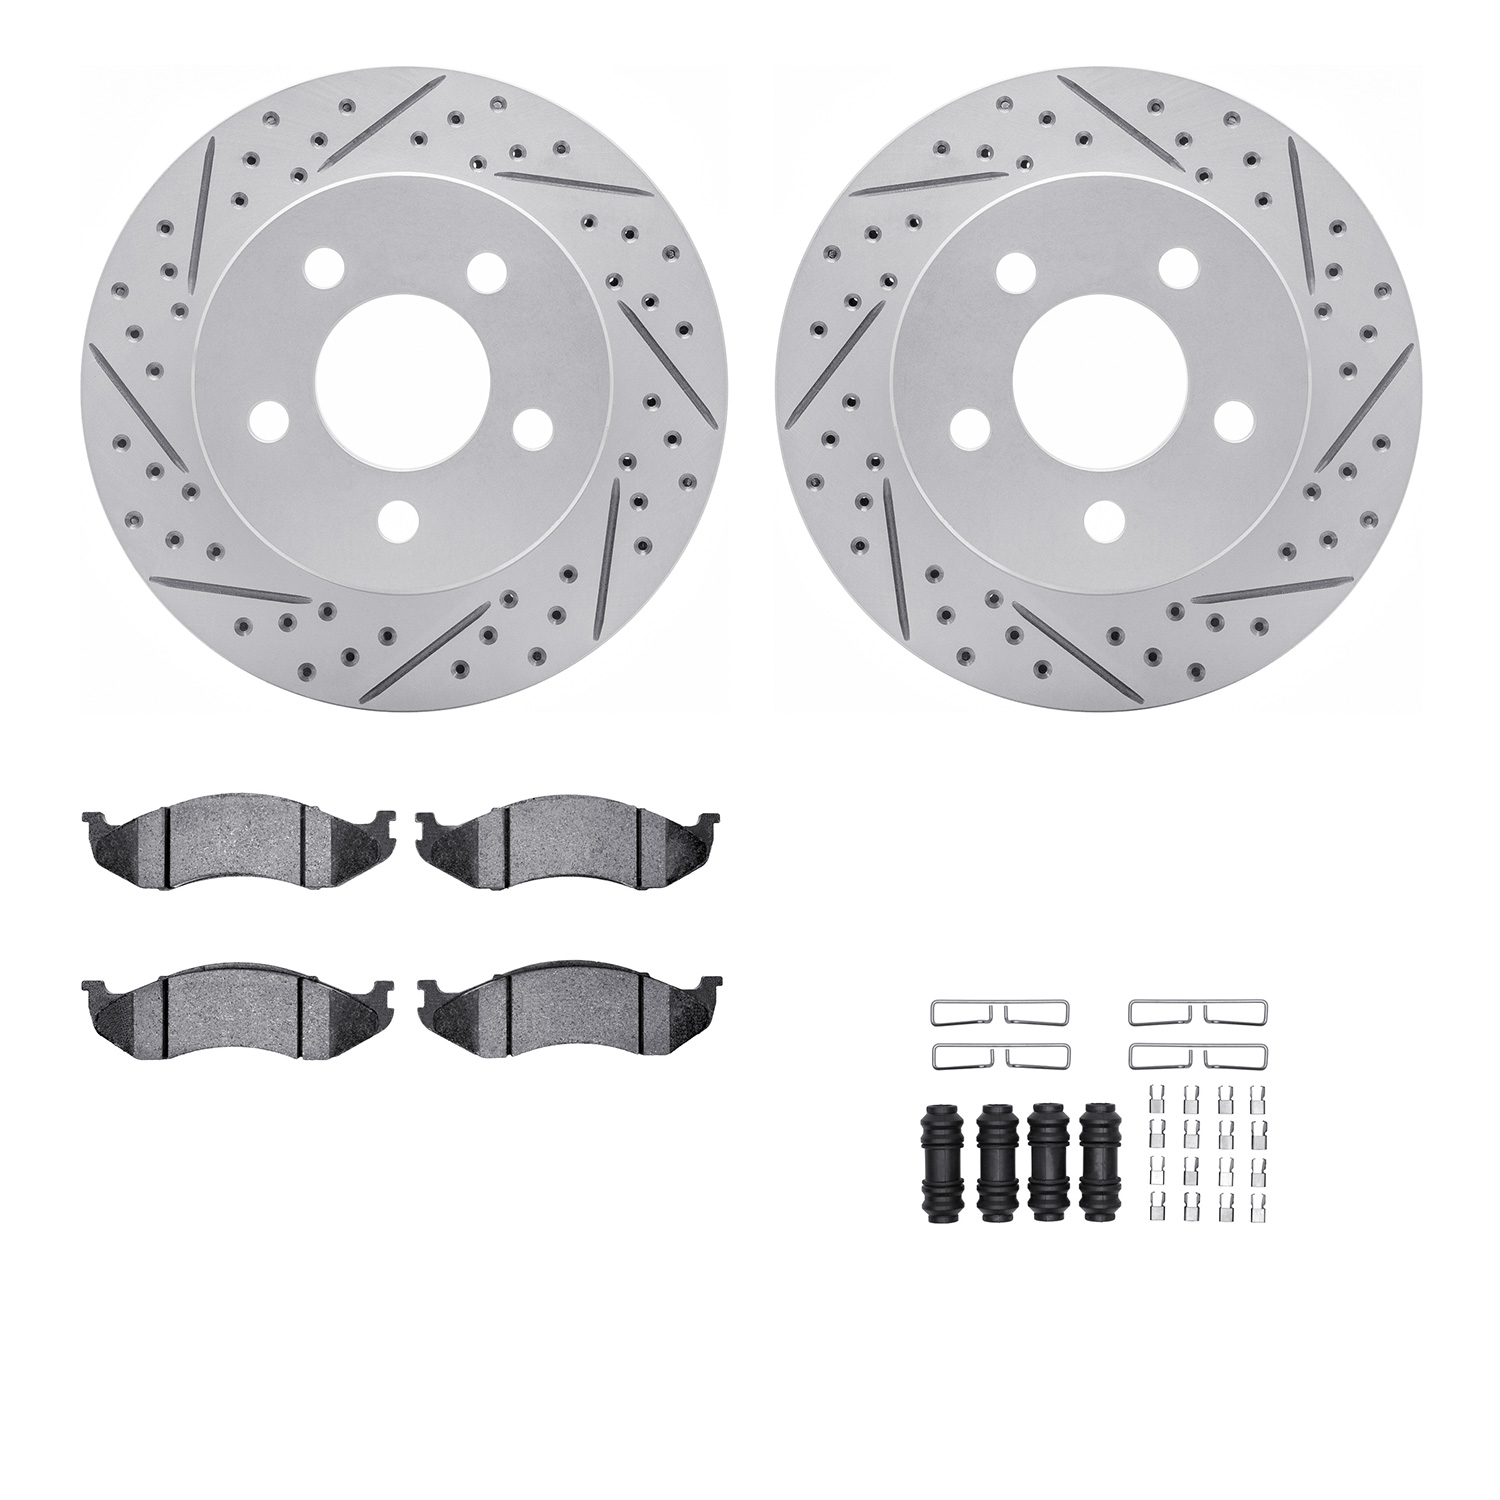 2212-42040 Geoperformance Drilled/Slotted Rotors w/Heavy-Duty Pads Kit & Hardware, 1999-2006 Mopar, Position: Front